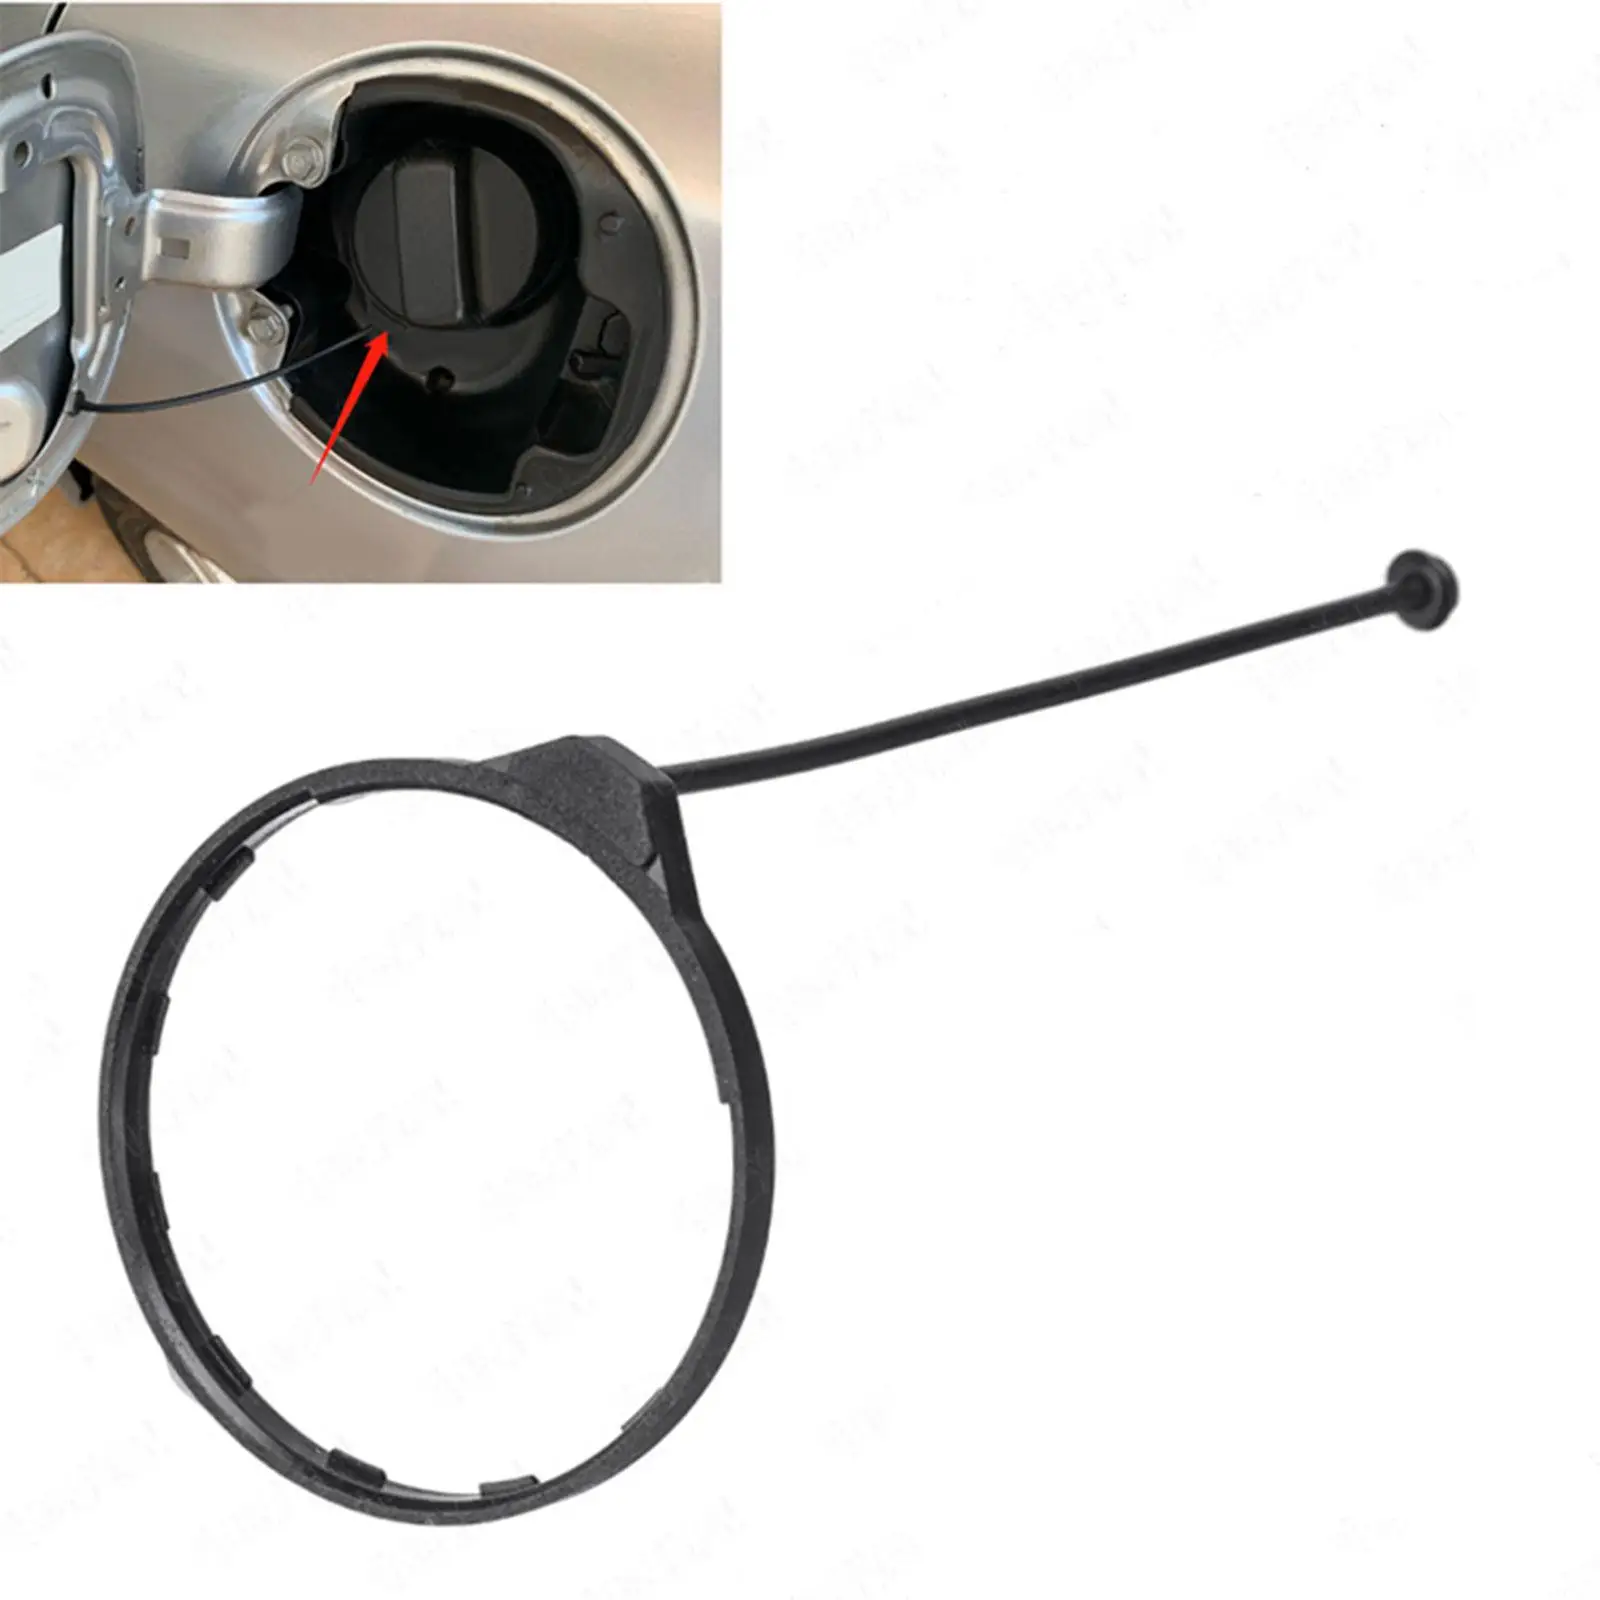 Fuel Tank Cap Rope Parts Anti Lost Rope Compact Wear Resistant Durable Vehicle with Ring Fuel Tank Cap Cord Line for Accord